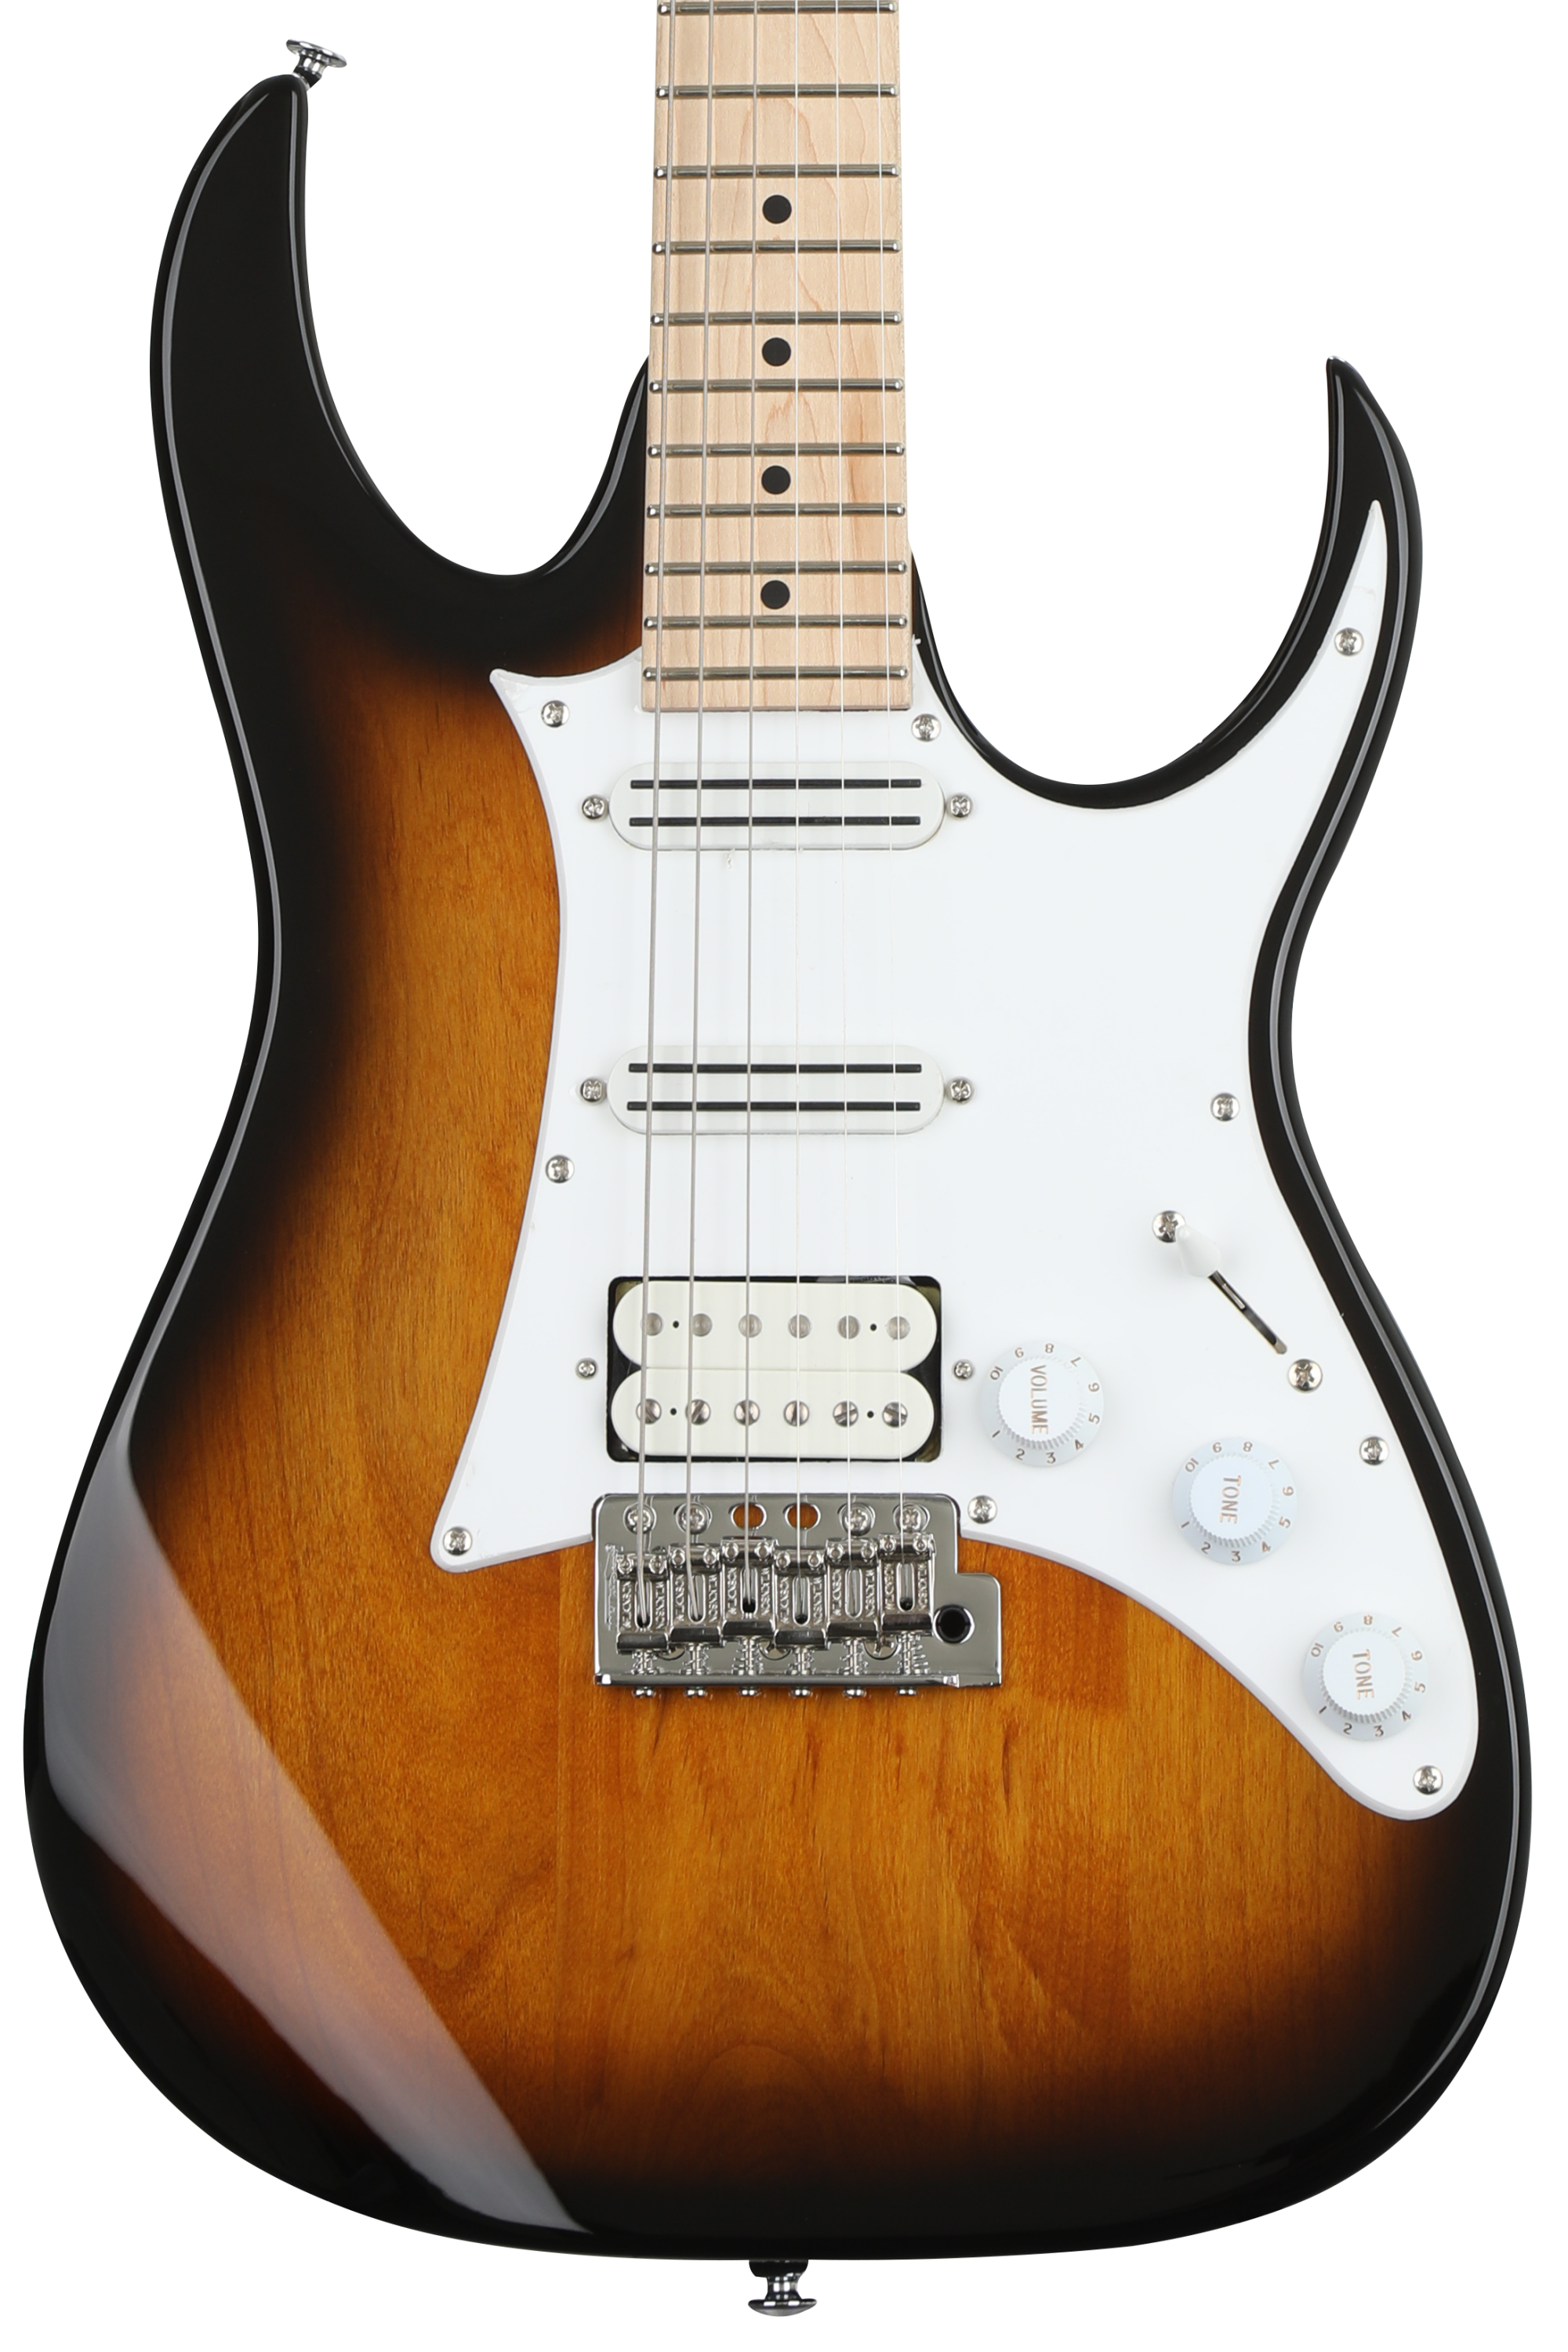 Ibanez Andy Timmons Signature AT10P - Sunburst | Sweetwater